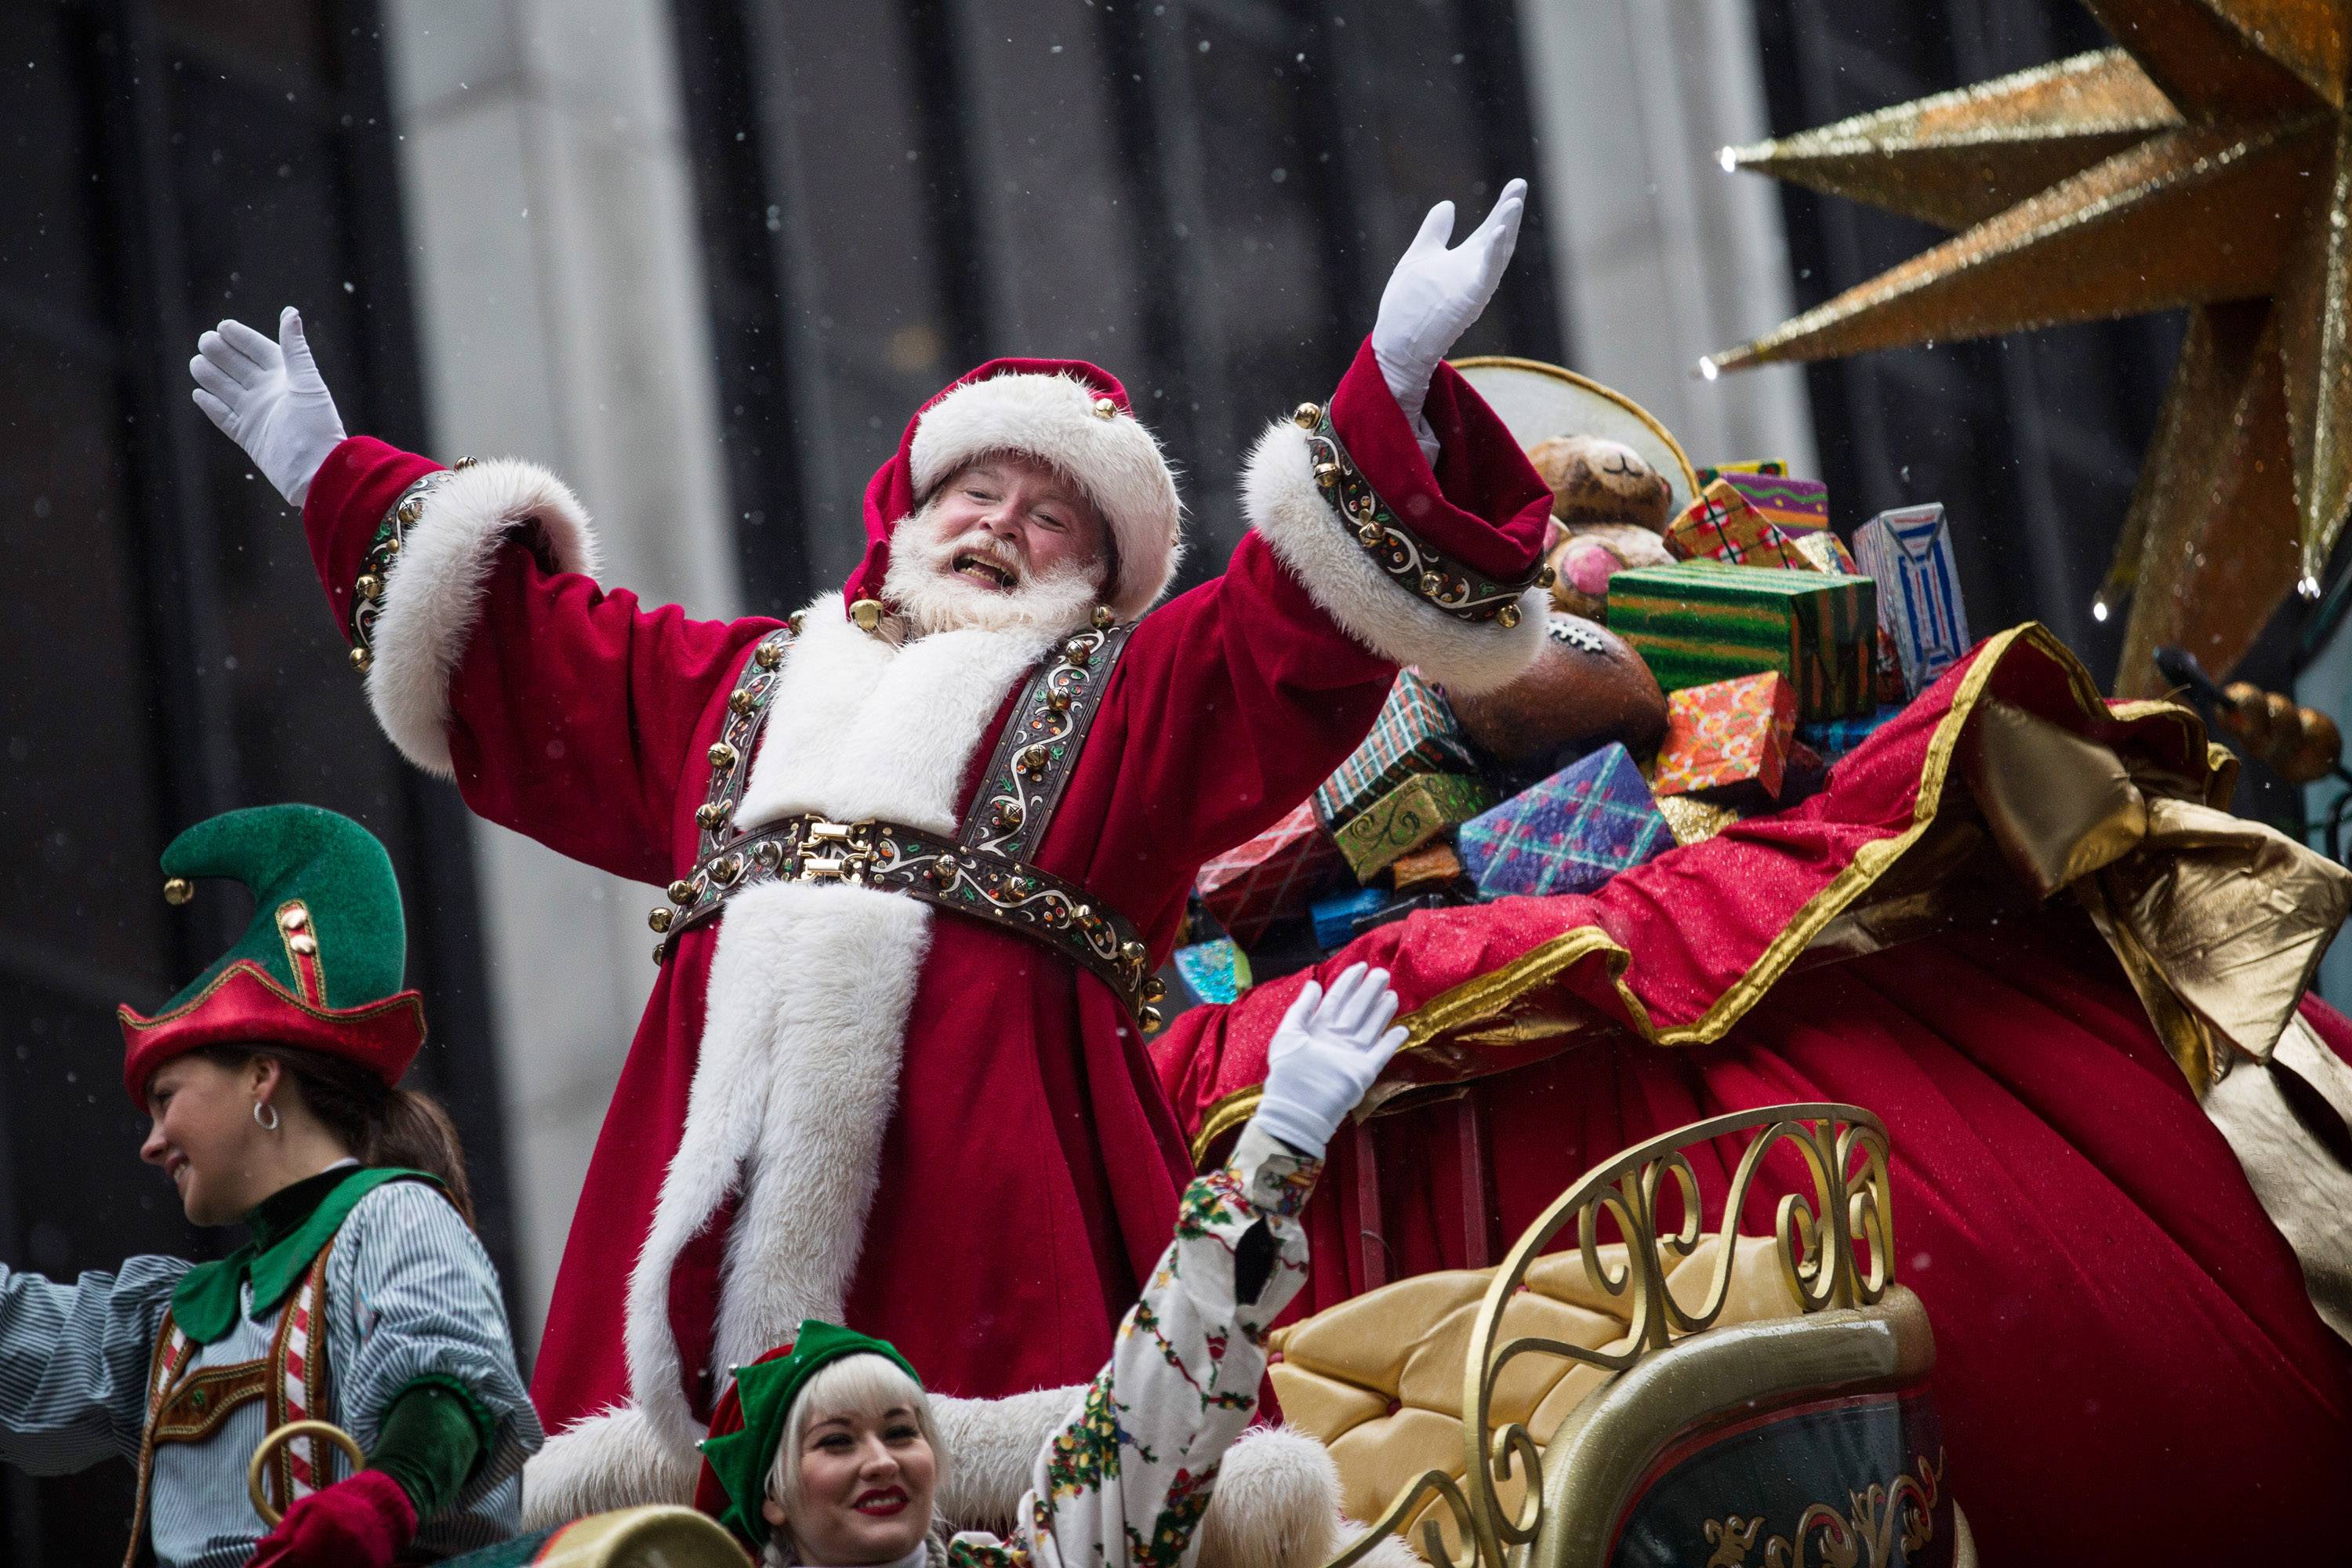 NEW YORK, NY - NOVEMBER 27:  Santa Claus waves to the crowd during the Macy's Thanksgiving Day Parade on November 27, 2014 in New York City. The annual tradition marks the start of the holiday season.  (Photo by Andrew Burton/Getty Images)